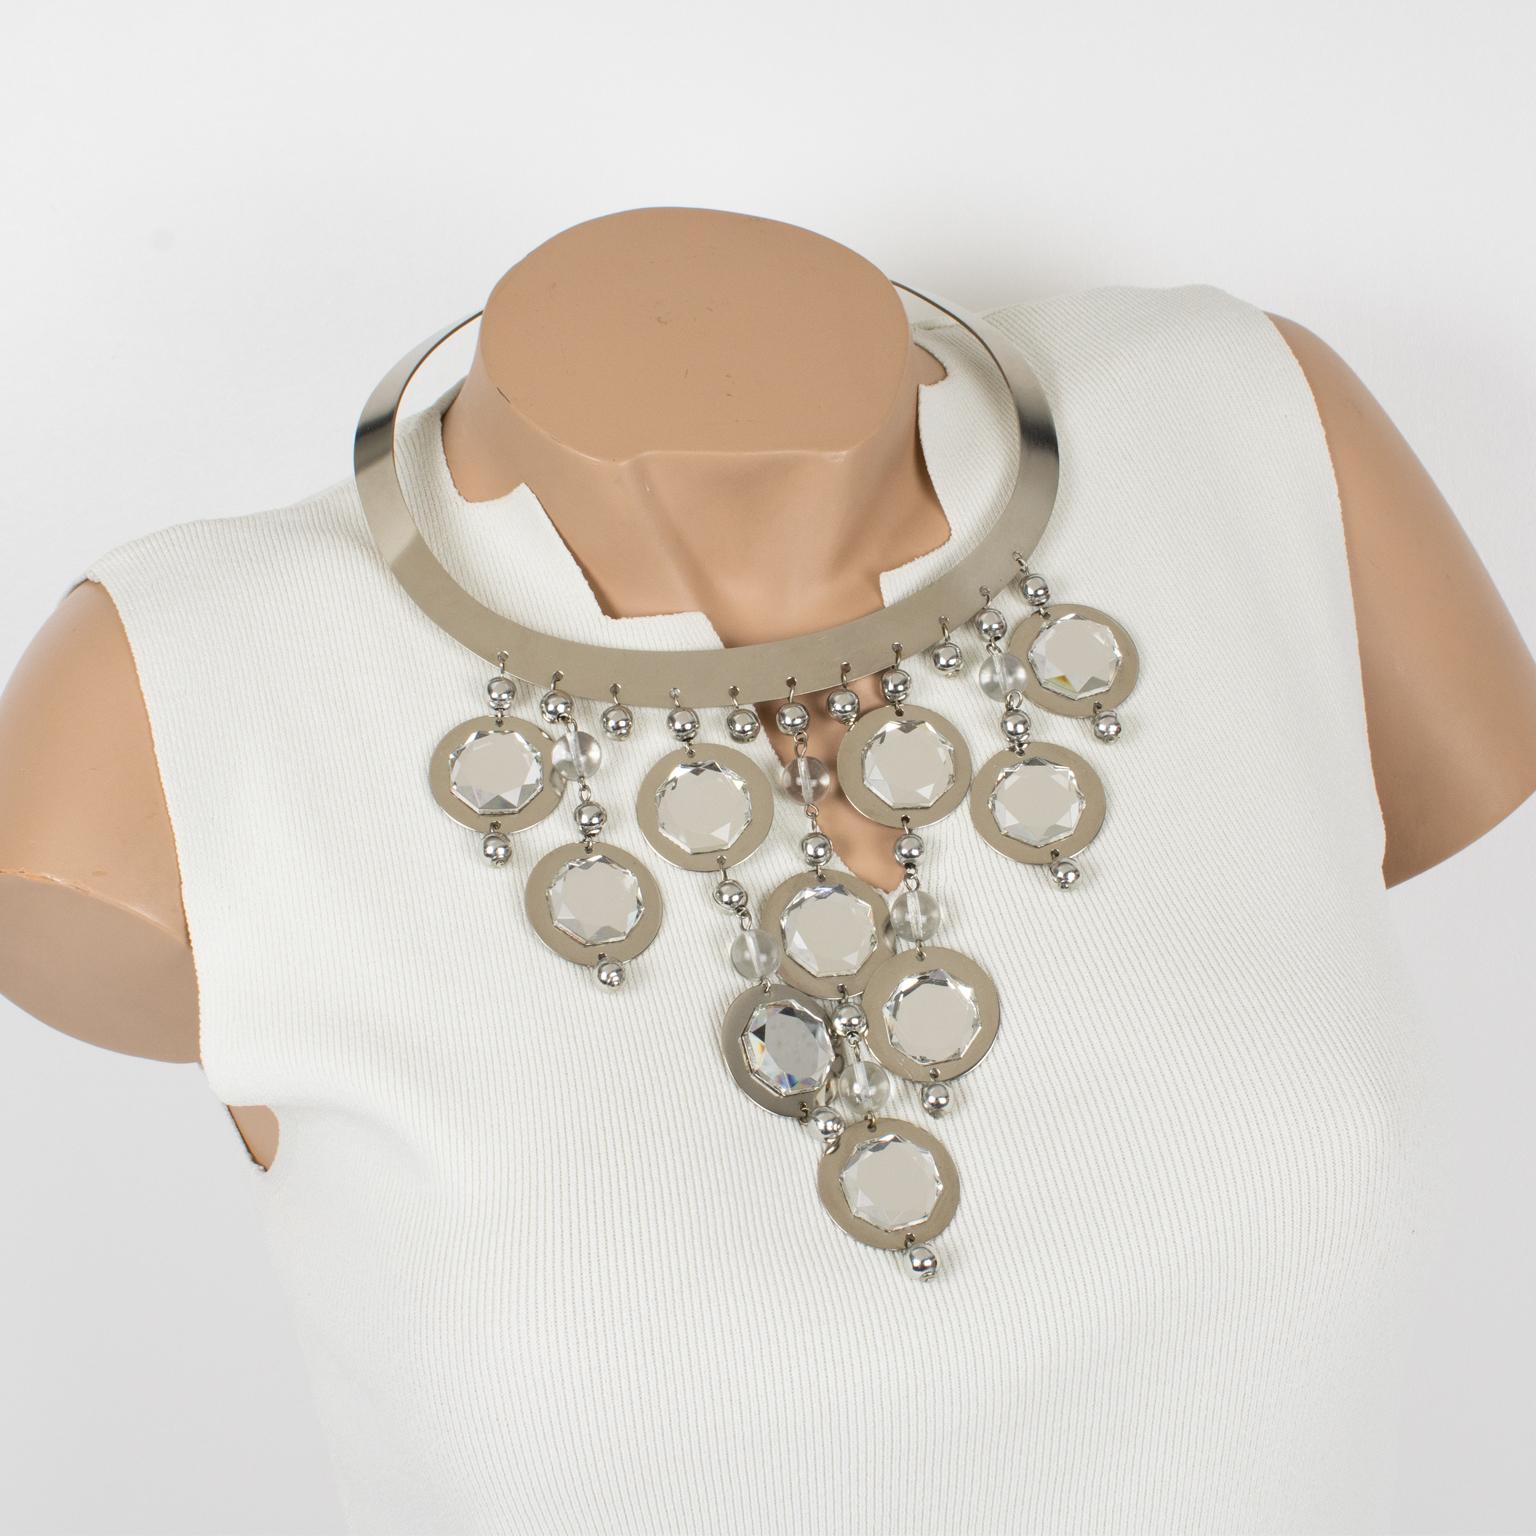 Louis Feraud Paris designed this spectacular sculptural Space Age collar pendant necklace in the 1960s. It features a chromed metal rigid oval neckband with a hook-closing clasp. The choker necklace is ornate with multiple charms dangling drops made